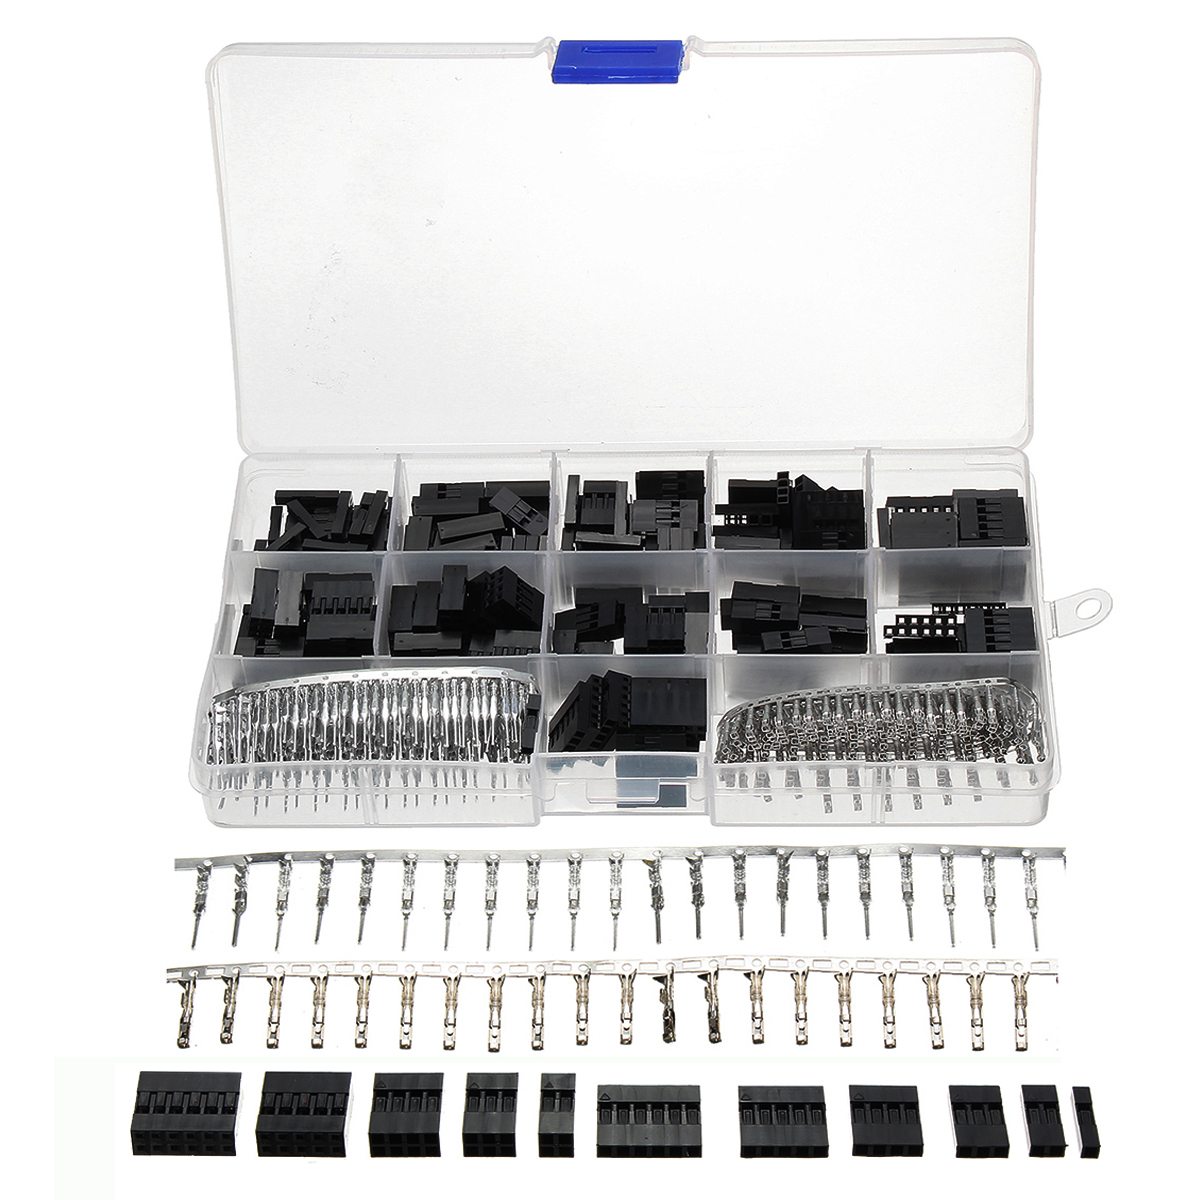 Excellway-TC10-620pcs-Wire-Jumper-Pin-Header-Connector-Housing-Kit-For-Dupont-and-Crimp-Pins-1132947-1